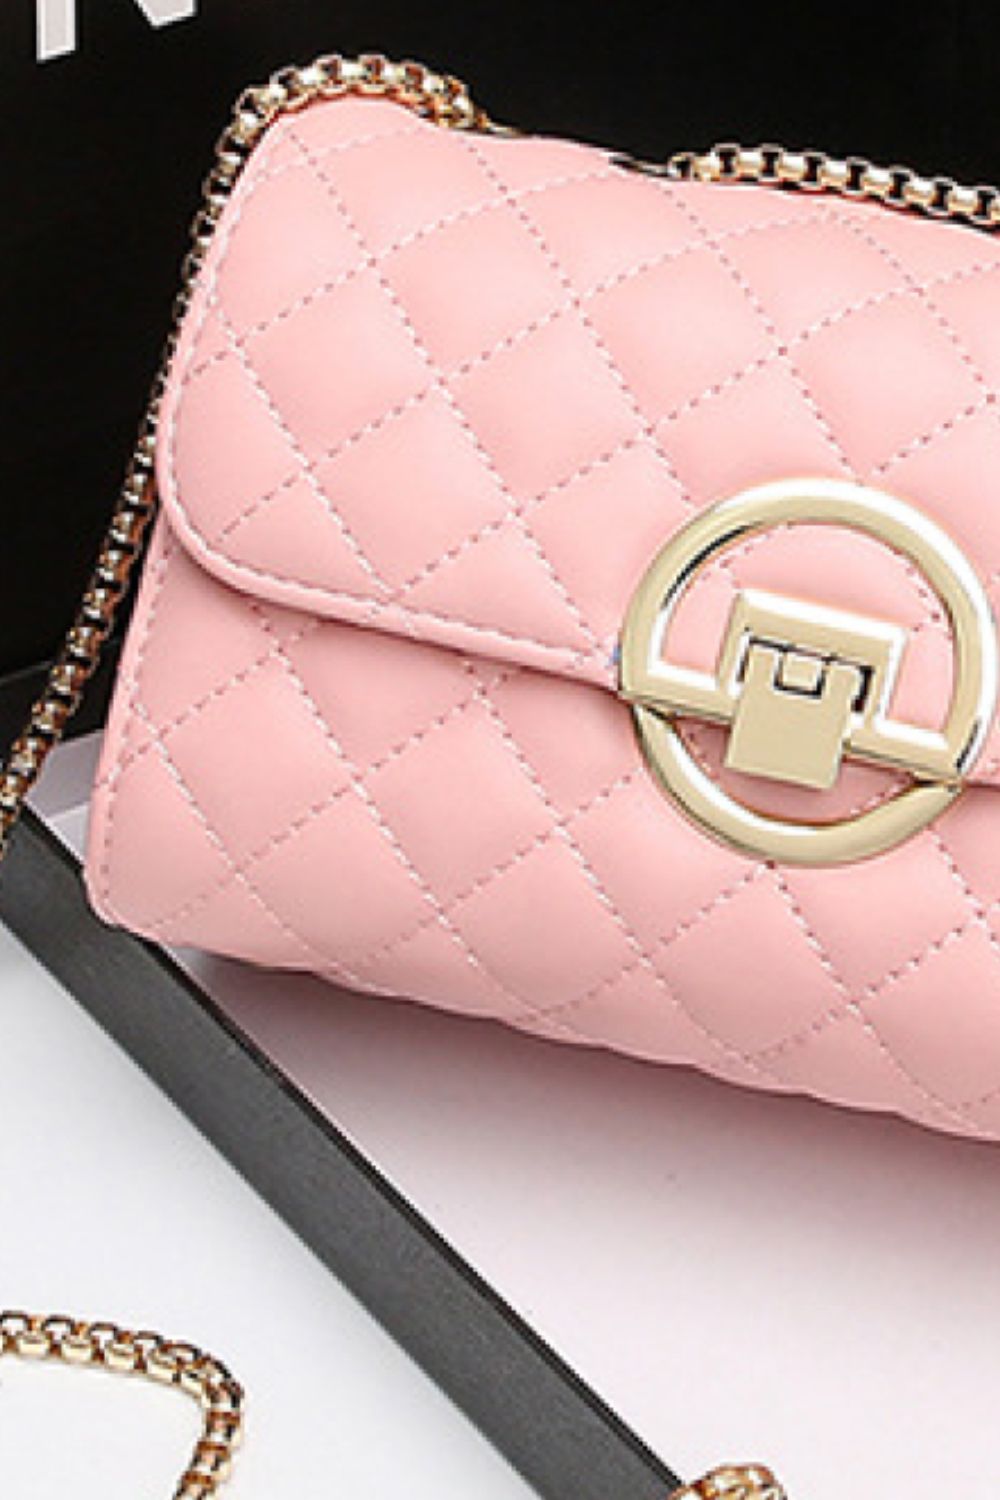 FREE GIFT WITH $150 PURCHASE Zurich Crossbody Bag